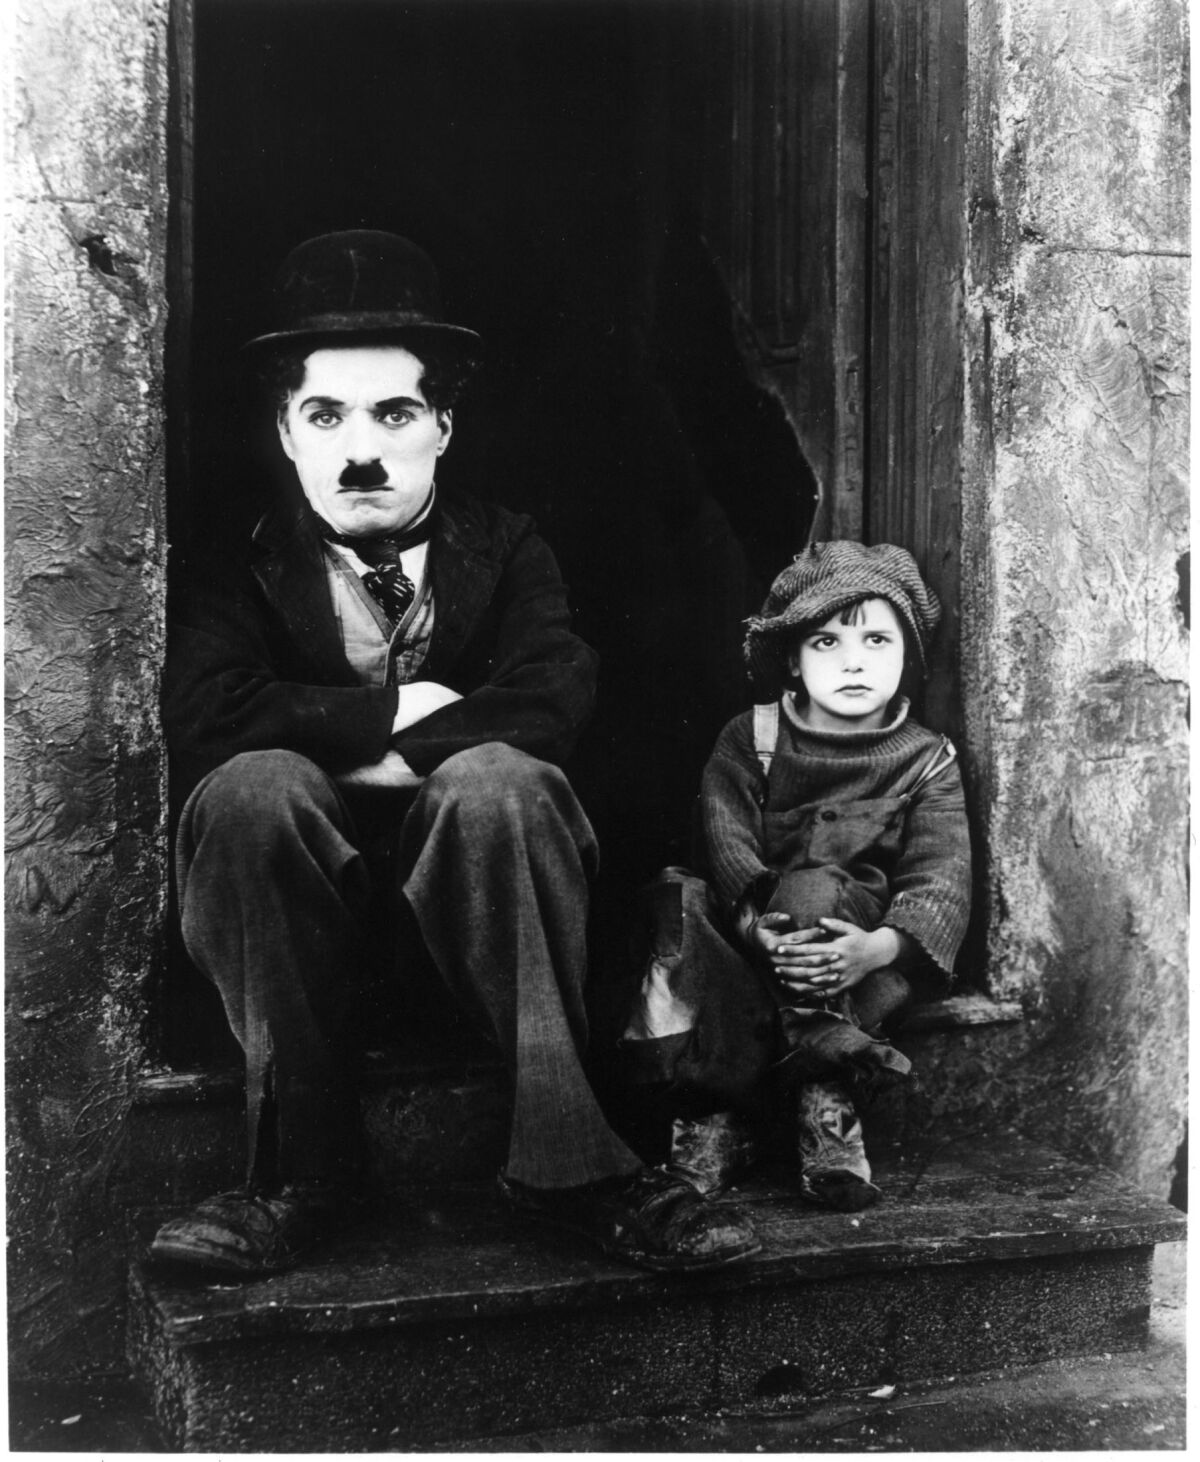 A black-and-white photo of a man and a child sitting on a stoop